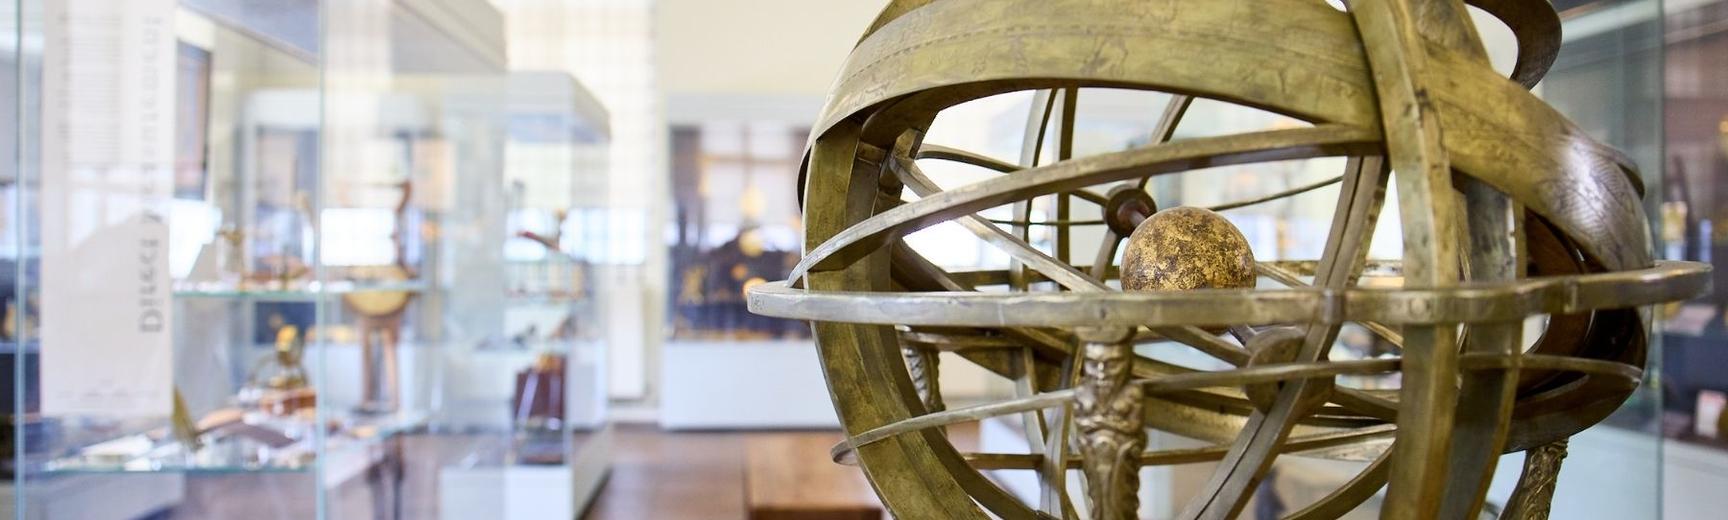 Armillary Sphere in the Top Gallery, History of Science Museum, University of Oxford